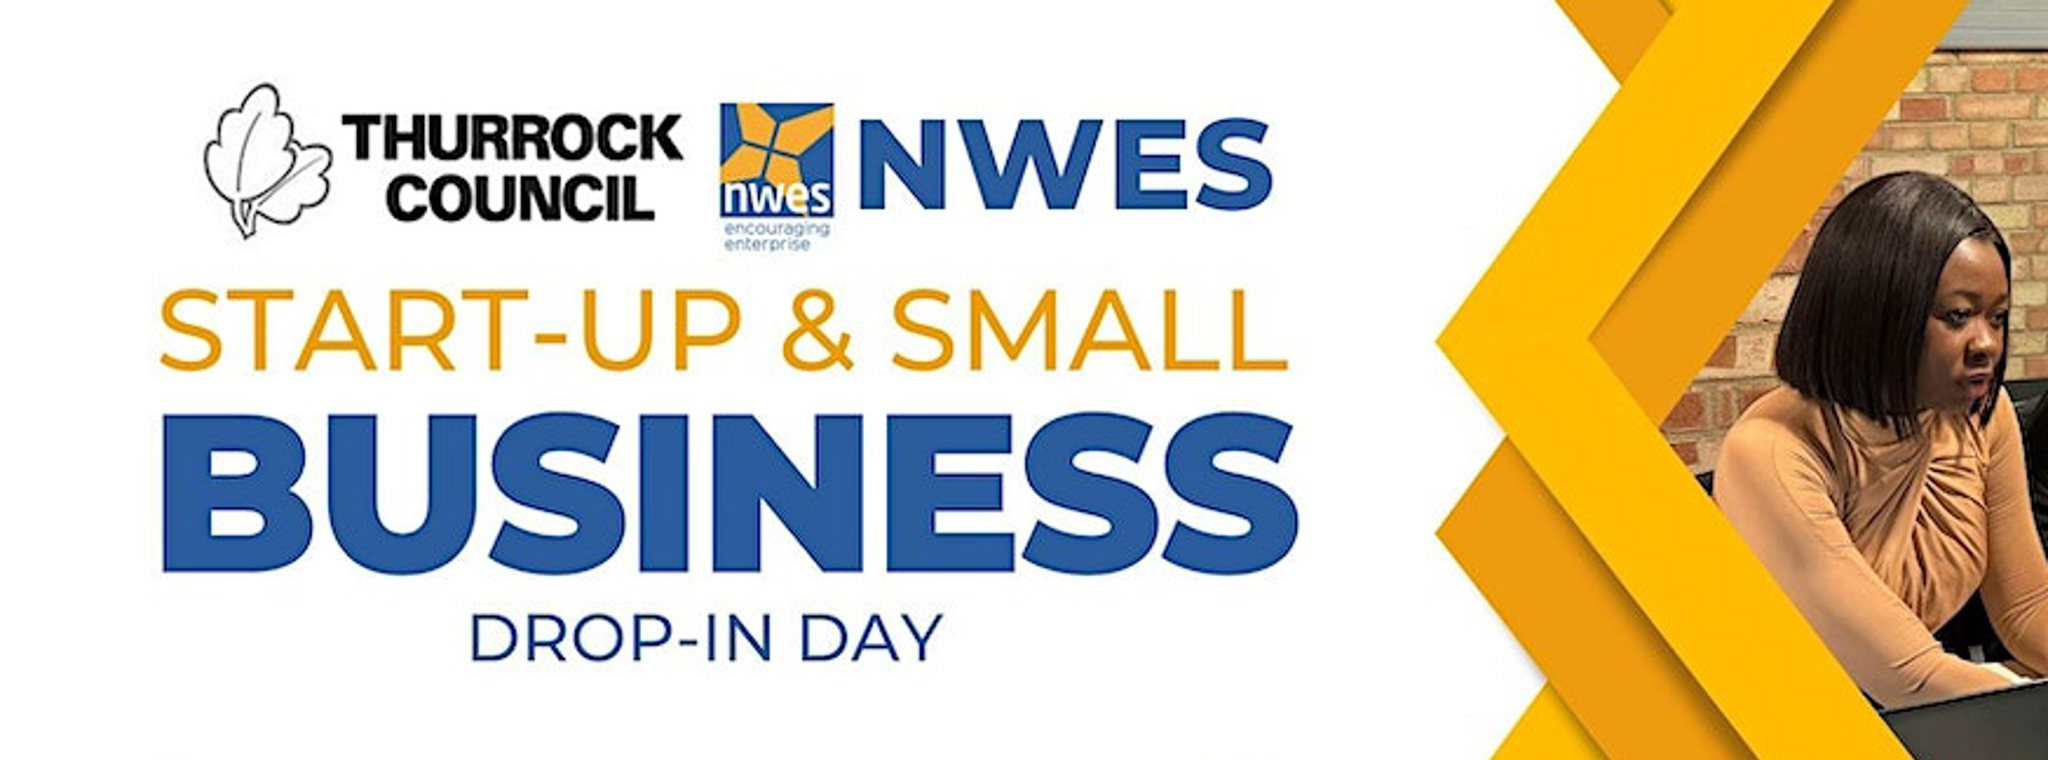 Small business drop-in day banner.